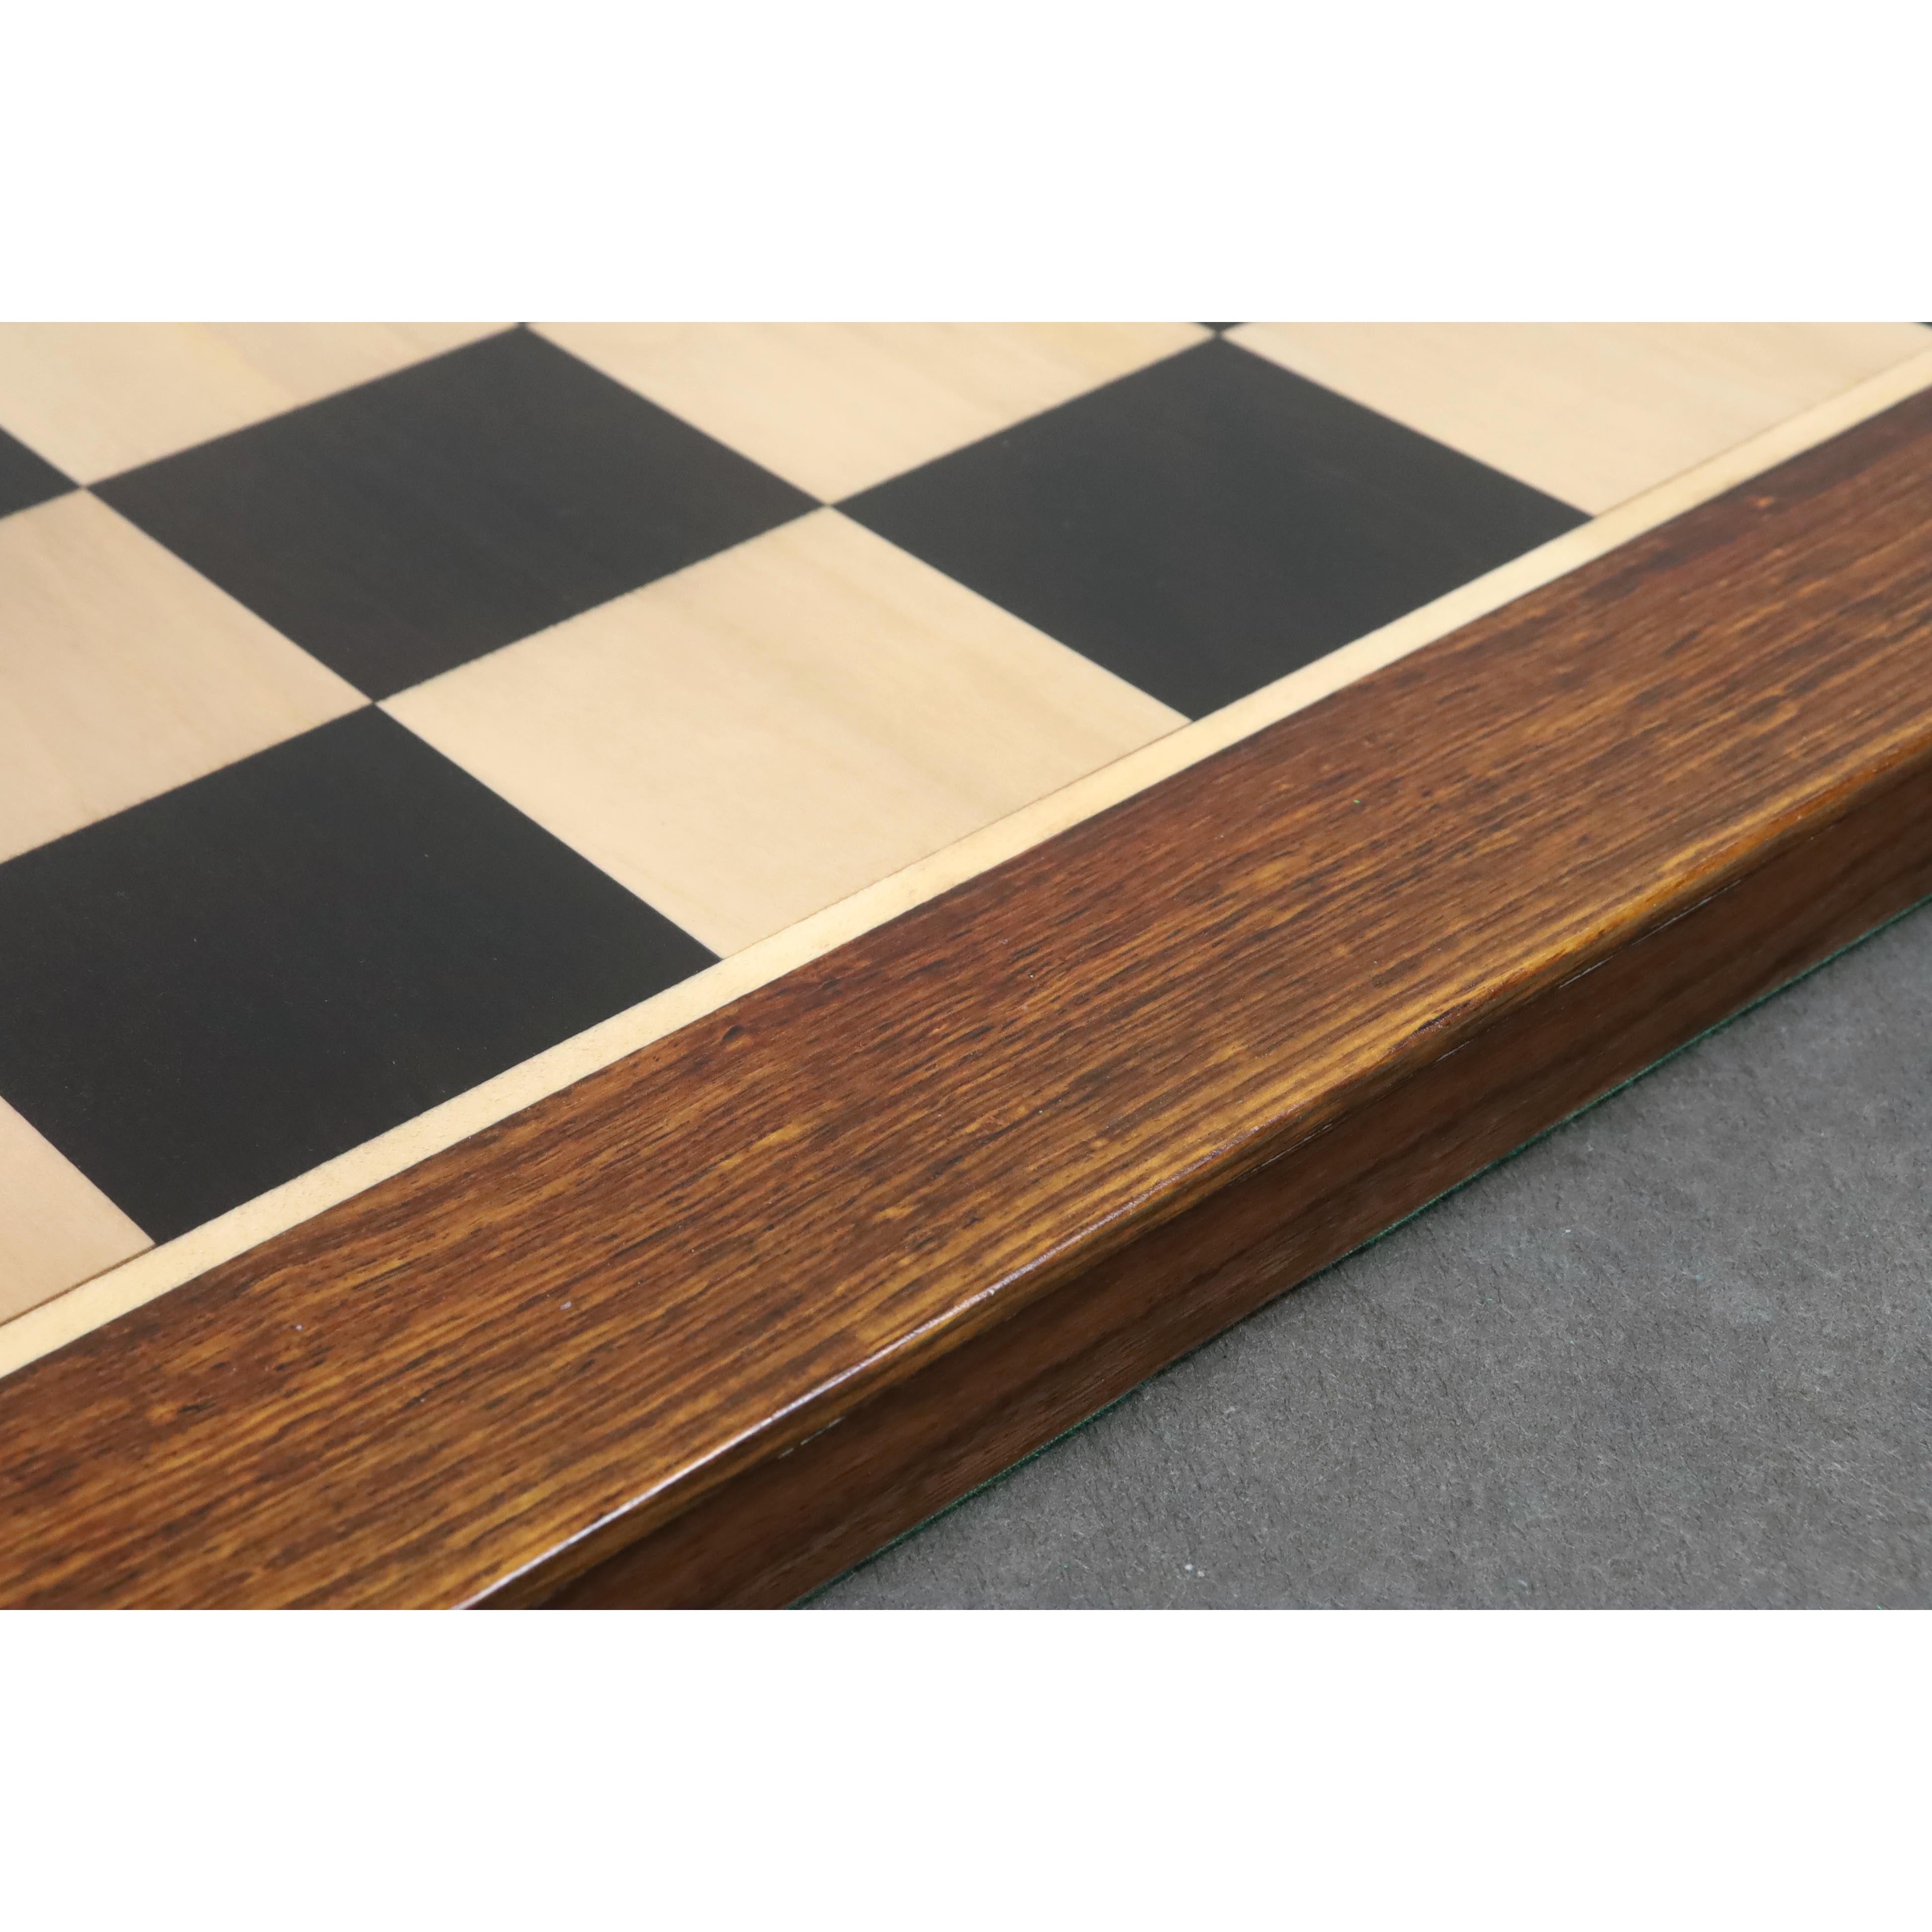 Arthur Luxury Staunton Chess Set Combo - Pieces in Ebony Wood with 23inches Chessboard and Storage Box